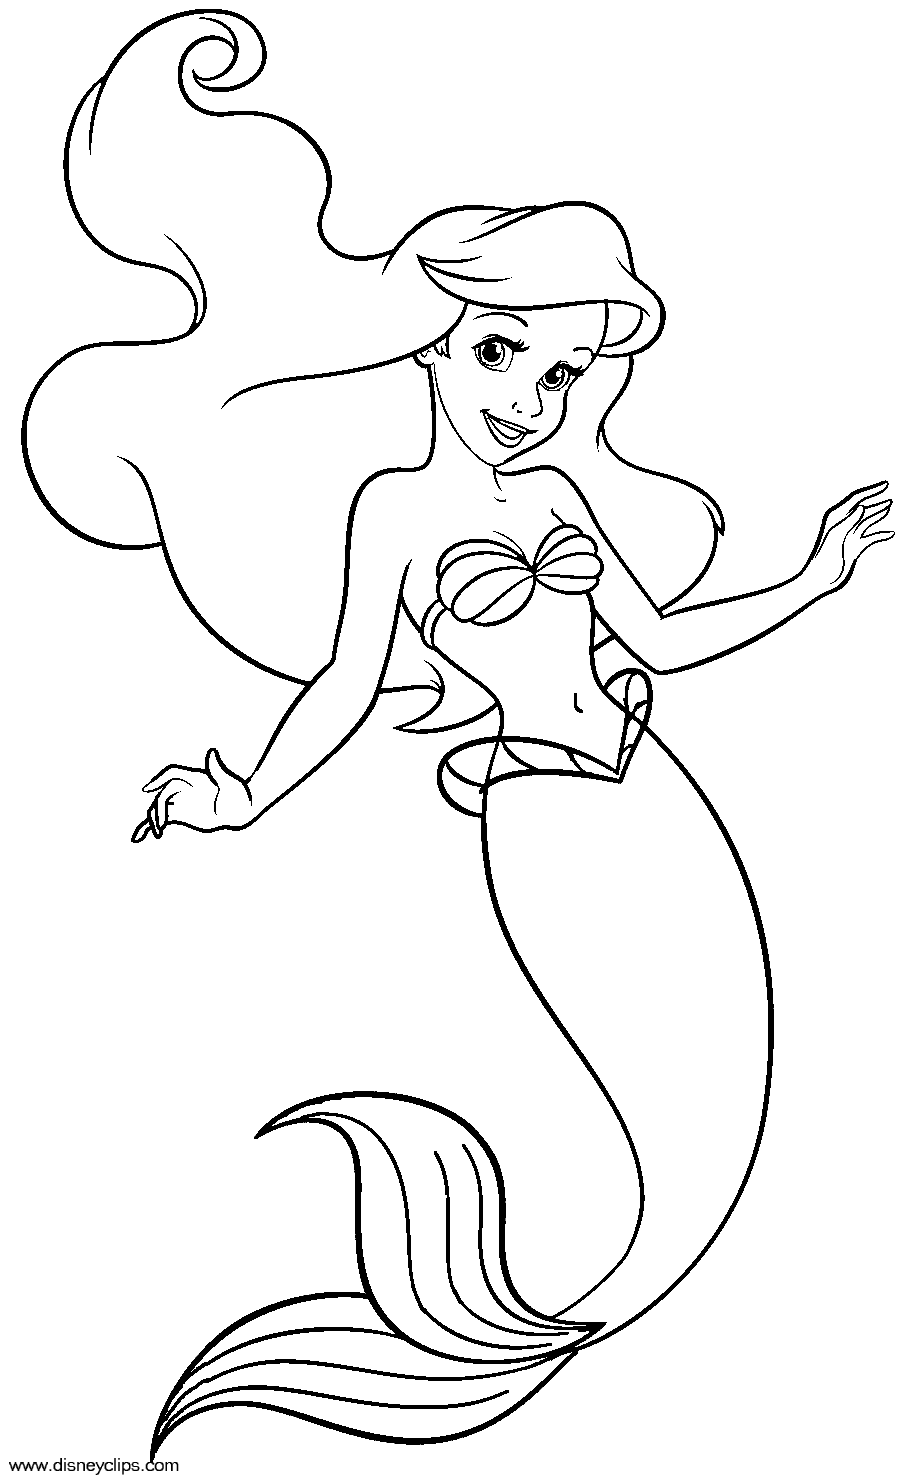 little mermaid color pages the little mermaid coloring pages to download and print mermaid color little pages 